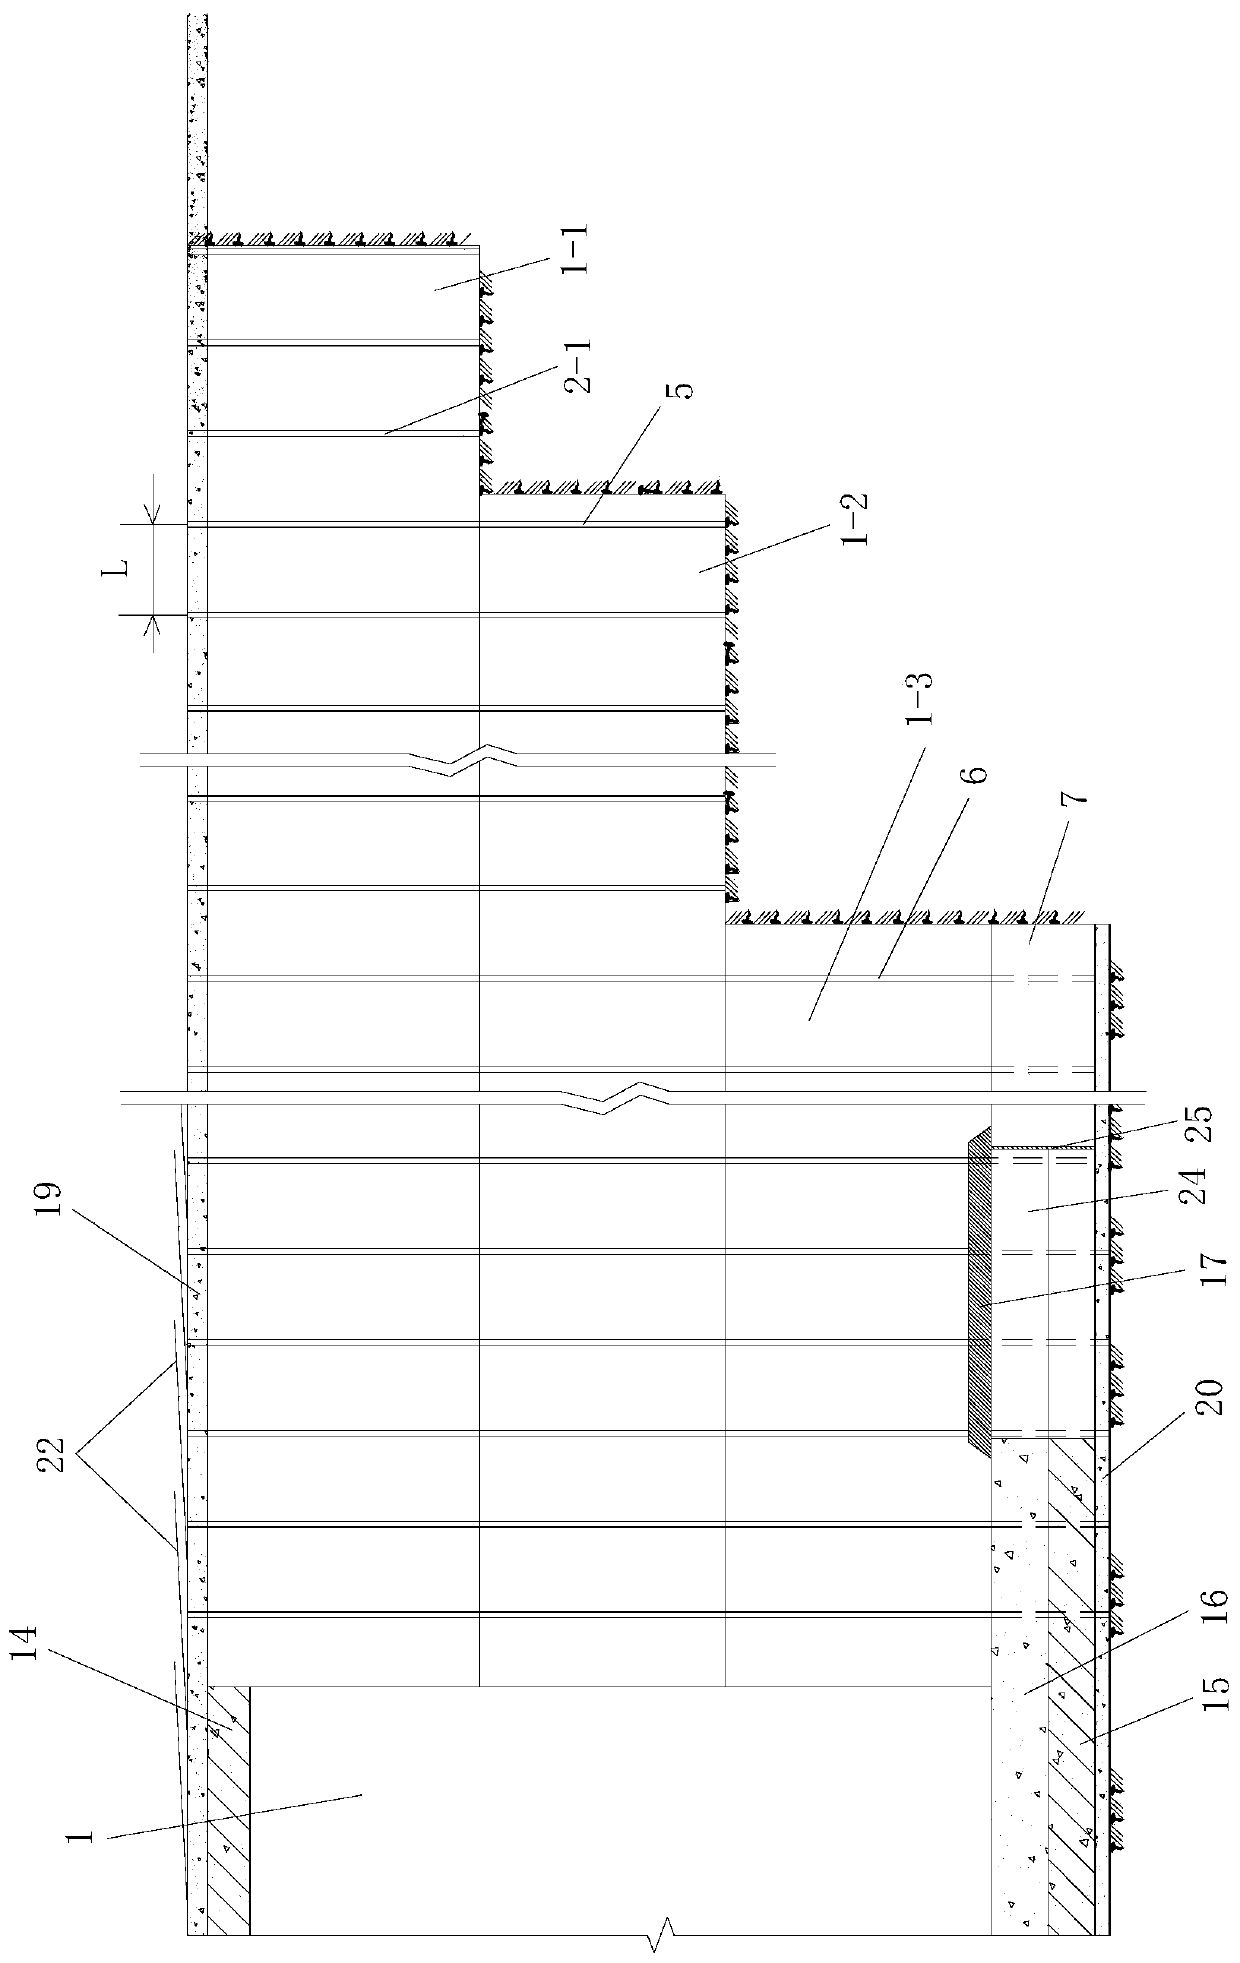 Large-section tunnel excavation and support construction method for crossing soil-rock boundary stratum